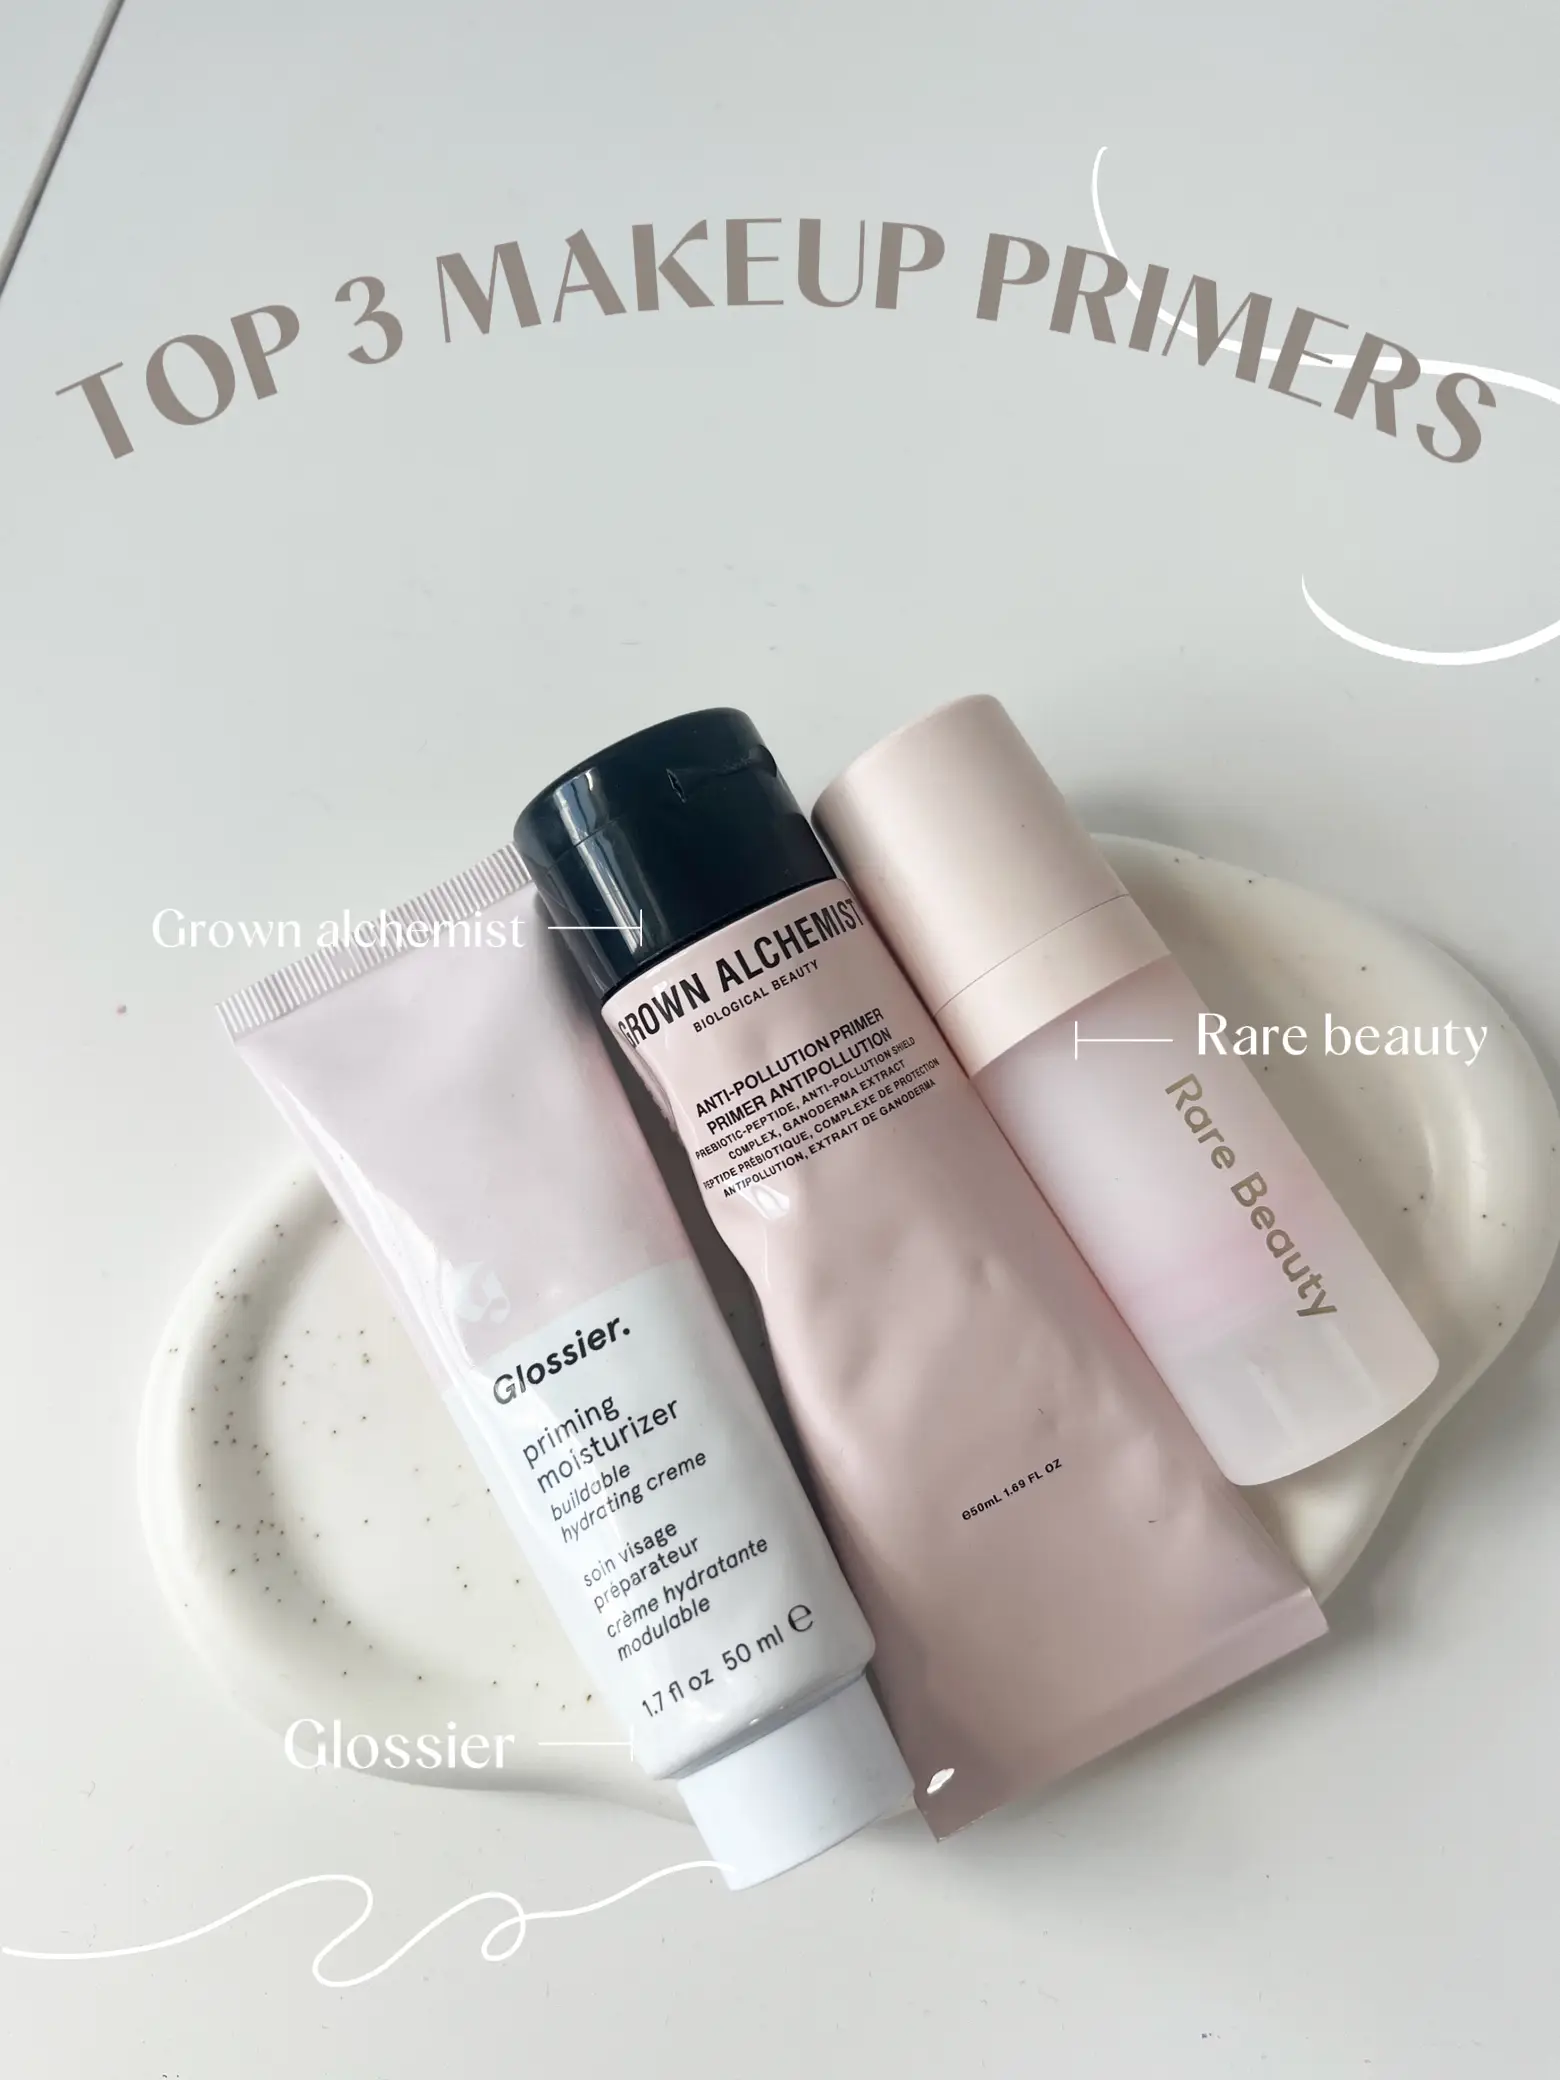 🌟 Makeup Primer 3 Review: | Must-Haves! by | Gallery 🌟 Top posted Lemon8 Janet